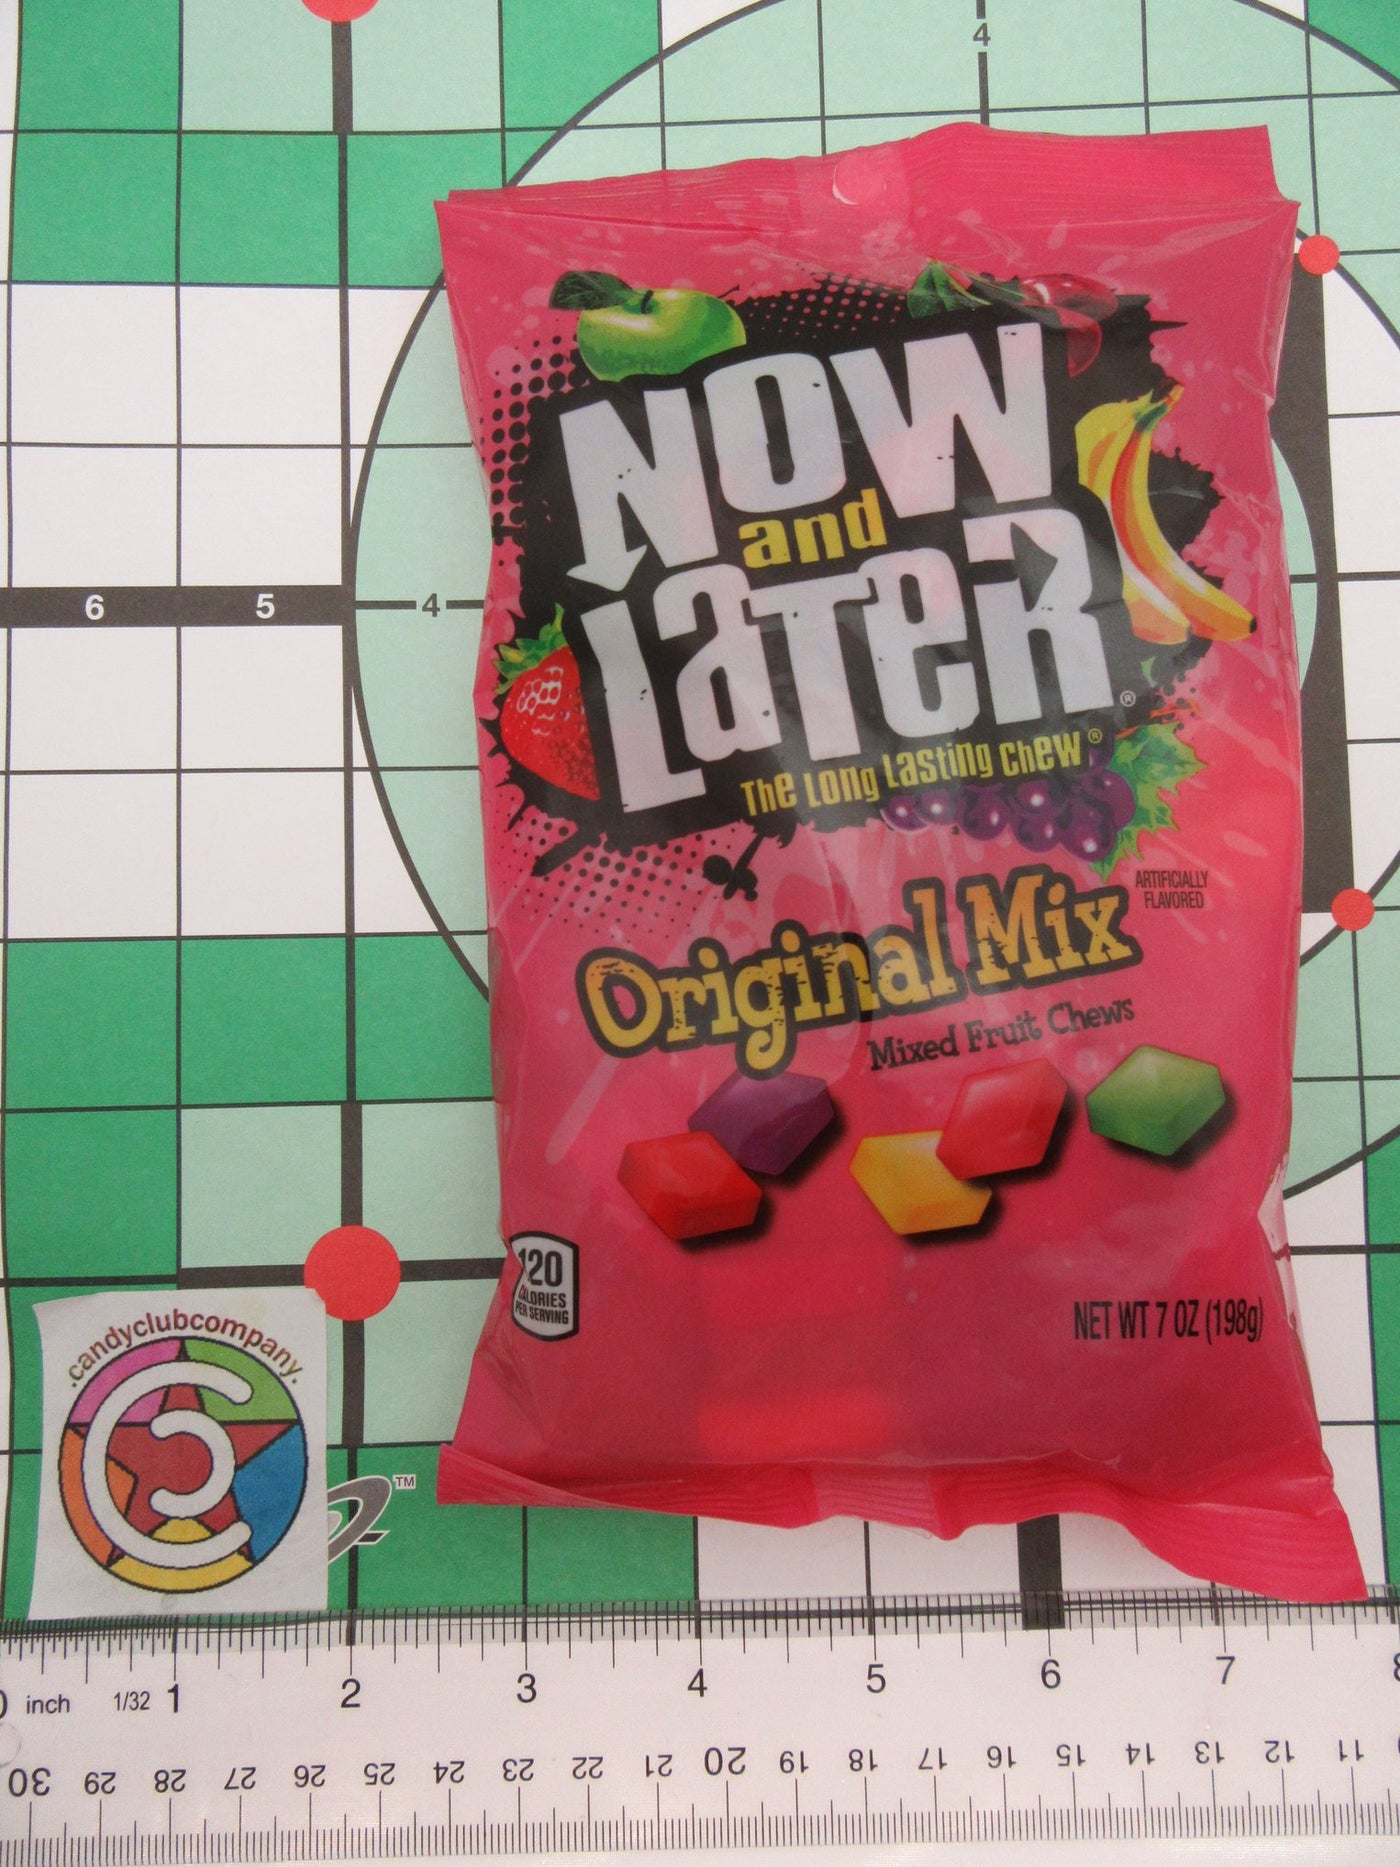 Now and Later ~ Original Mix ~ Mixed Fruit Chews Candy ~ 7oz Bag ~ Lot of 2